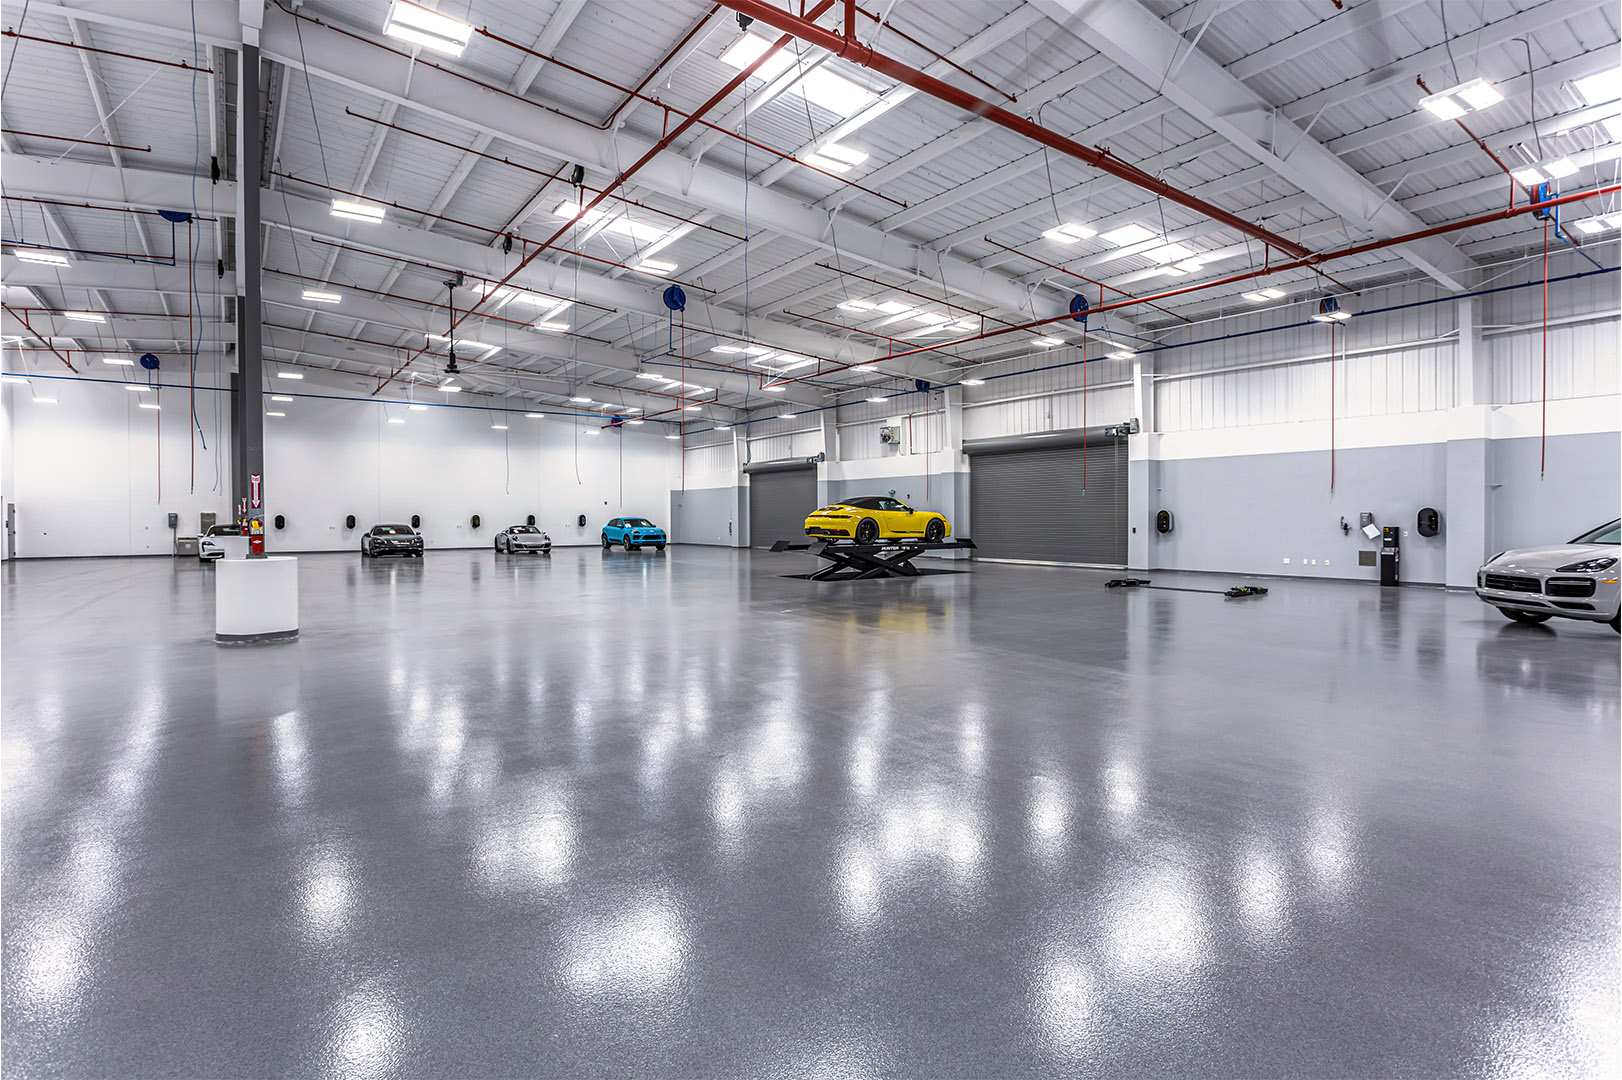 ARCO Completes Auto Processing Facility in Southern California